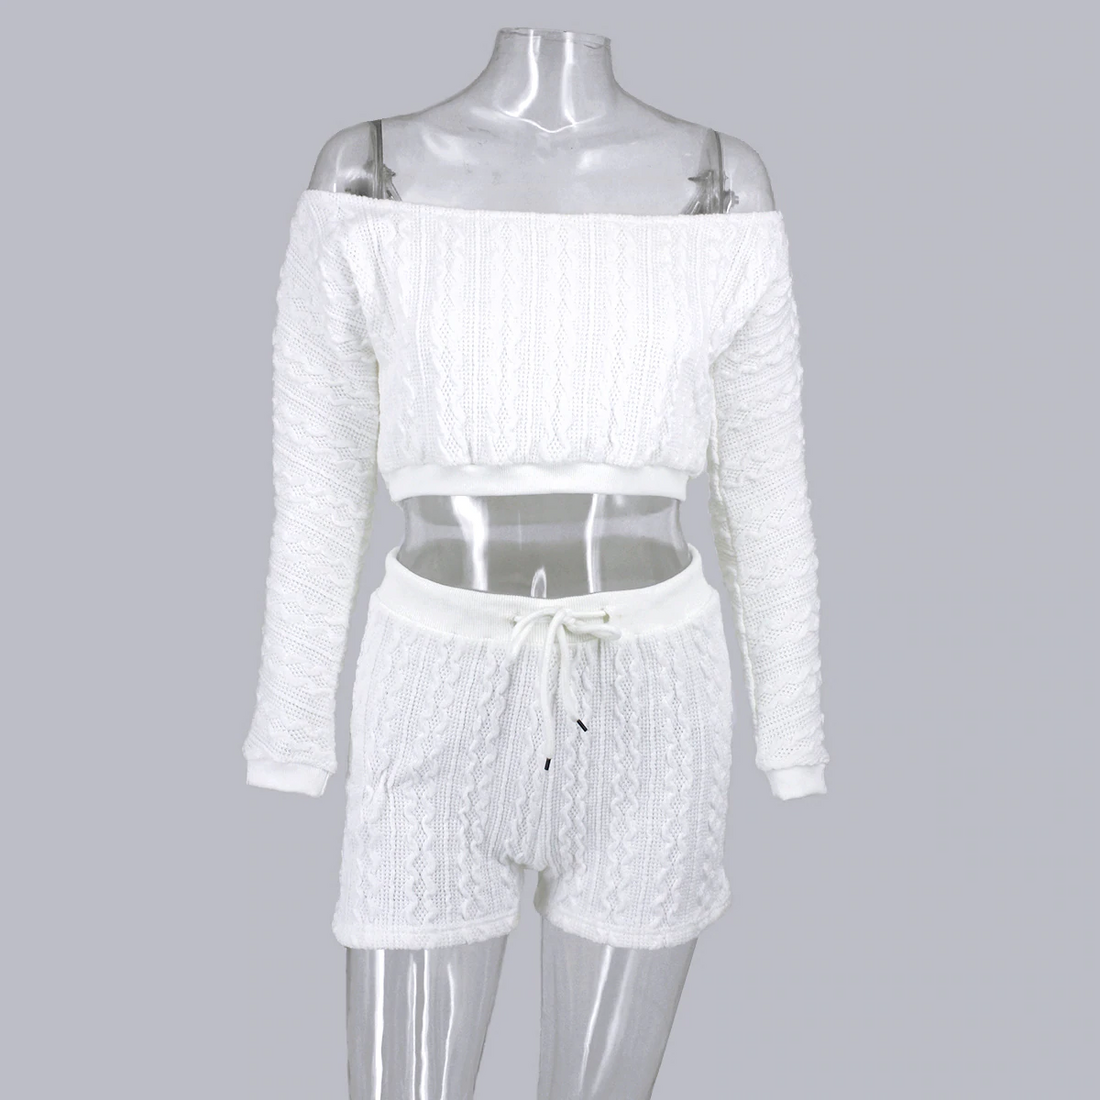 Women's Knitted Long-Sleeved Elastic Two-Piece Set Suit